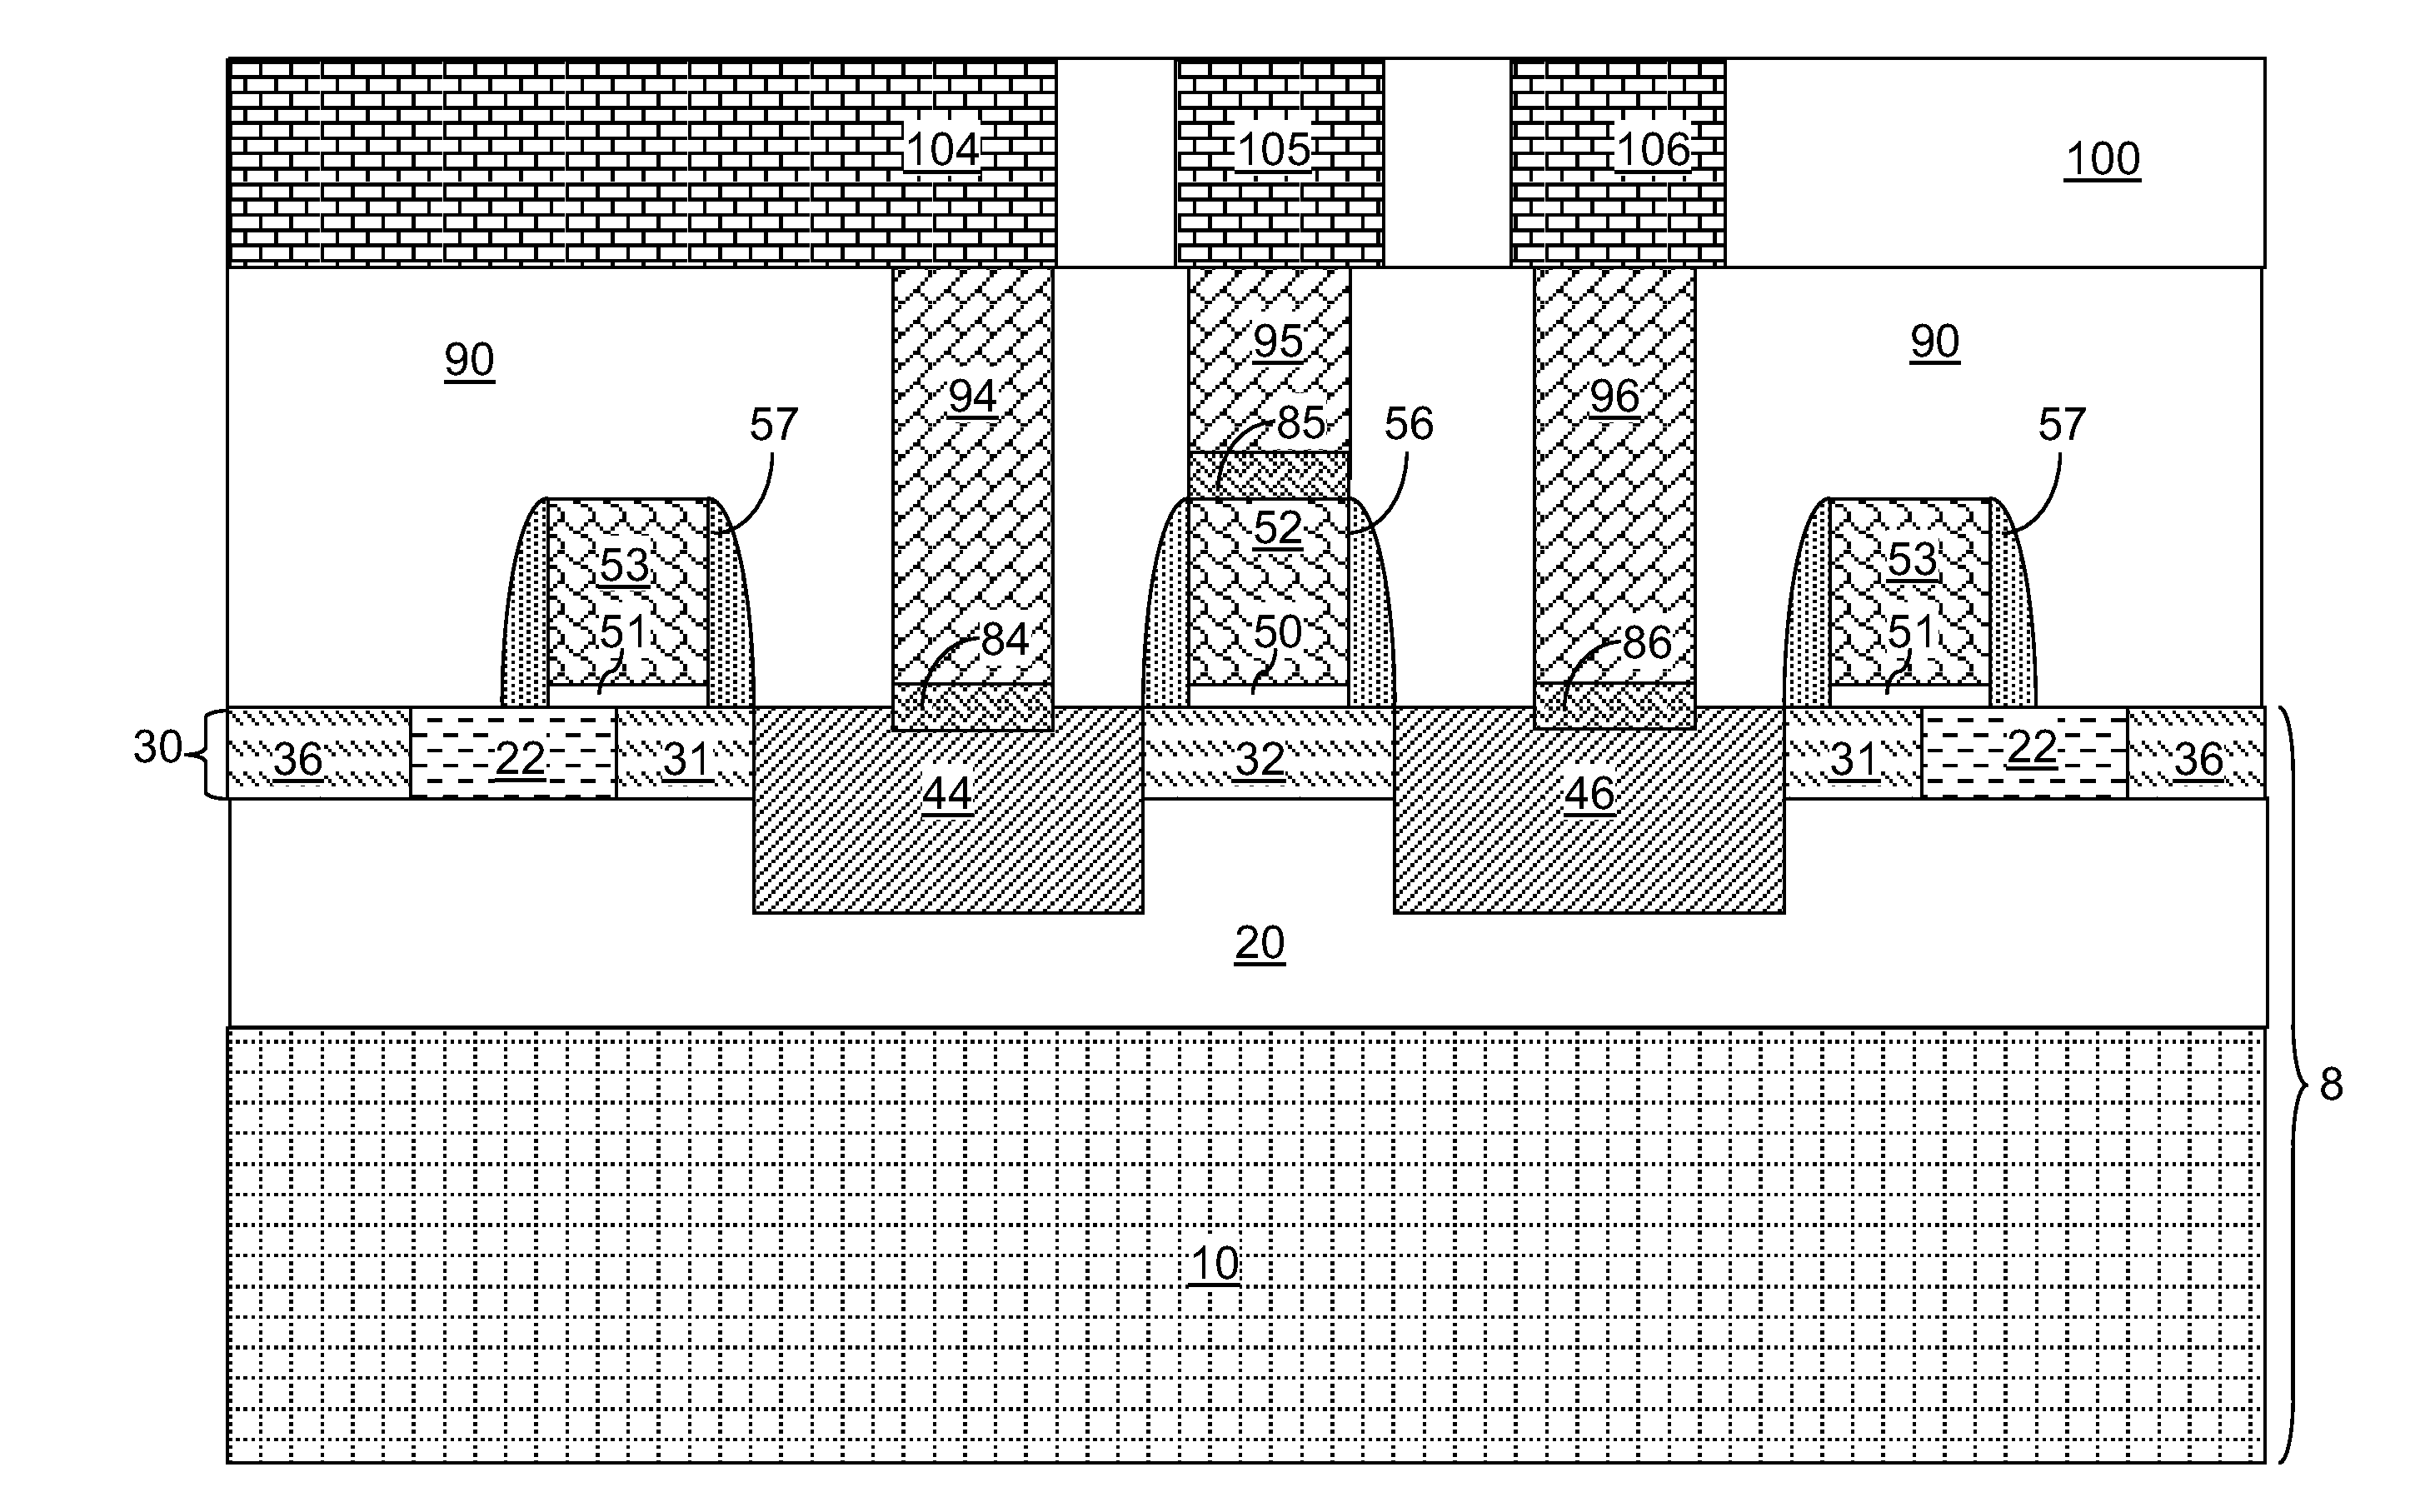 Recessed Single Crystalline Source and Drain For Semiconductor-On-Insulator Devices